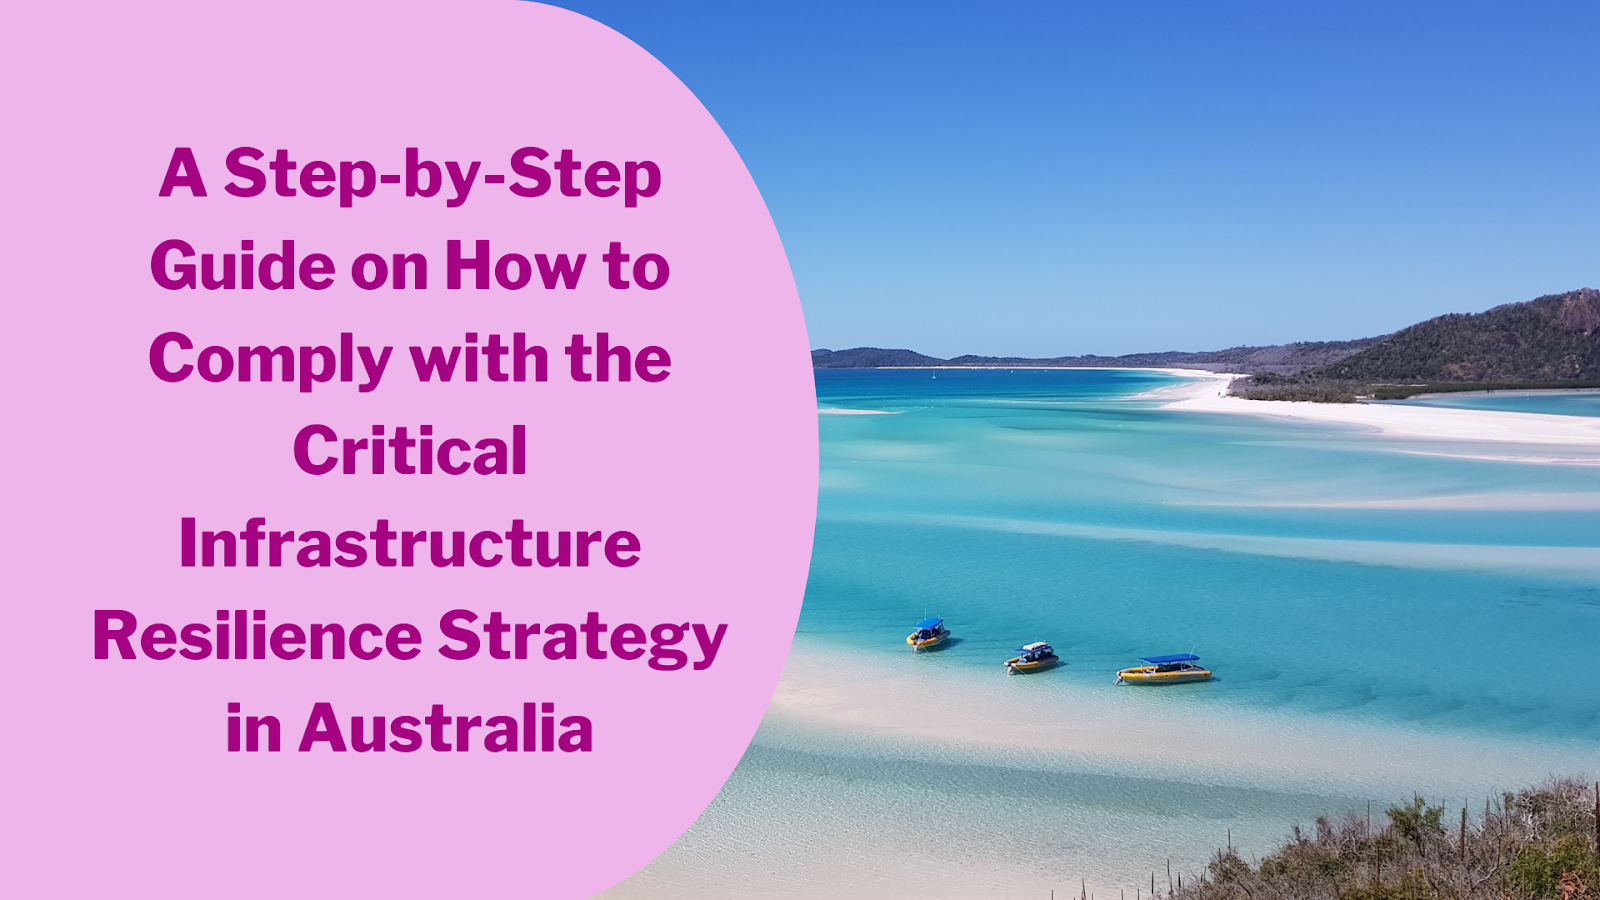 A Step-by-Step Guide on How to Comply with the Critical Infrastructure Resilience Strategy in Australia